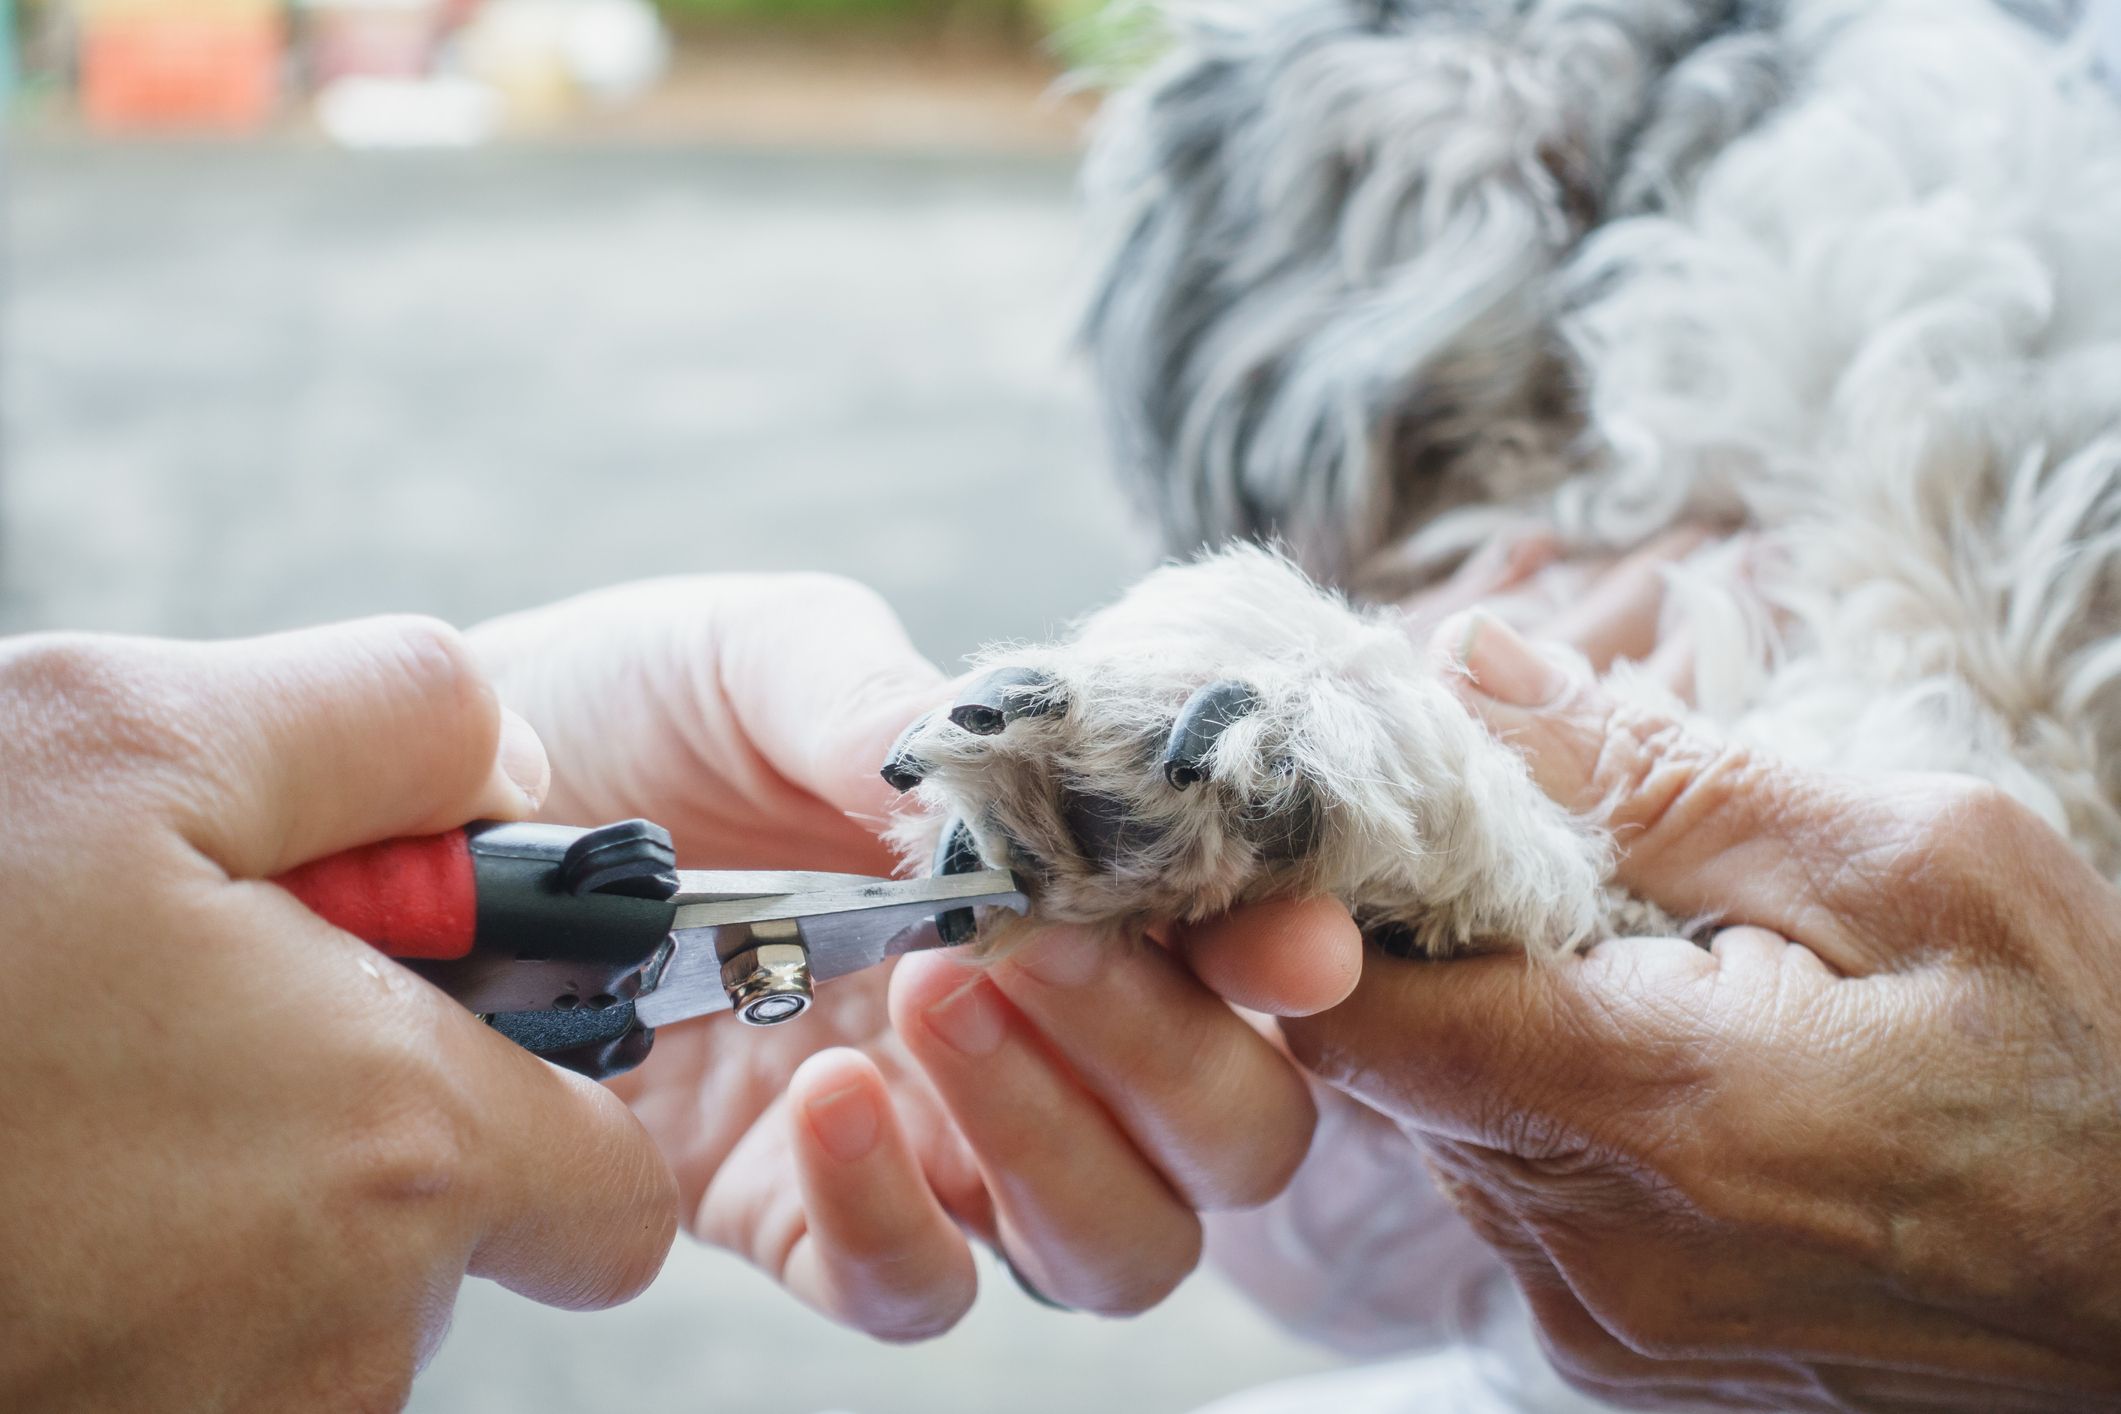 How to trim a dog's nails step by step and the products you need to do it